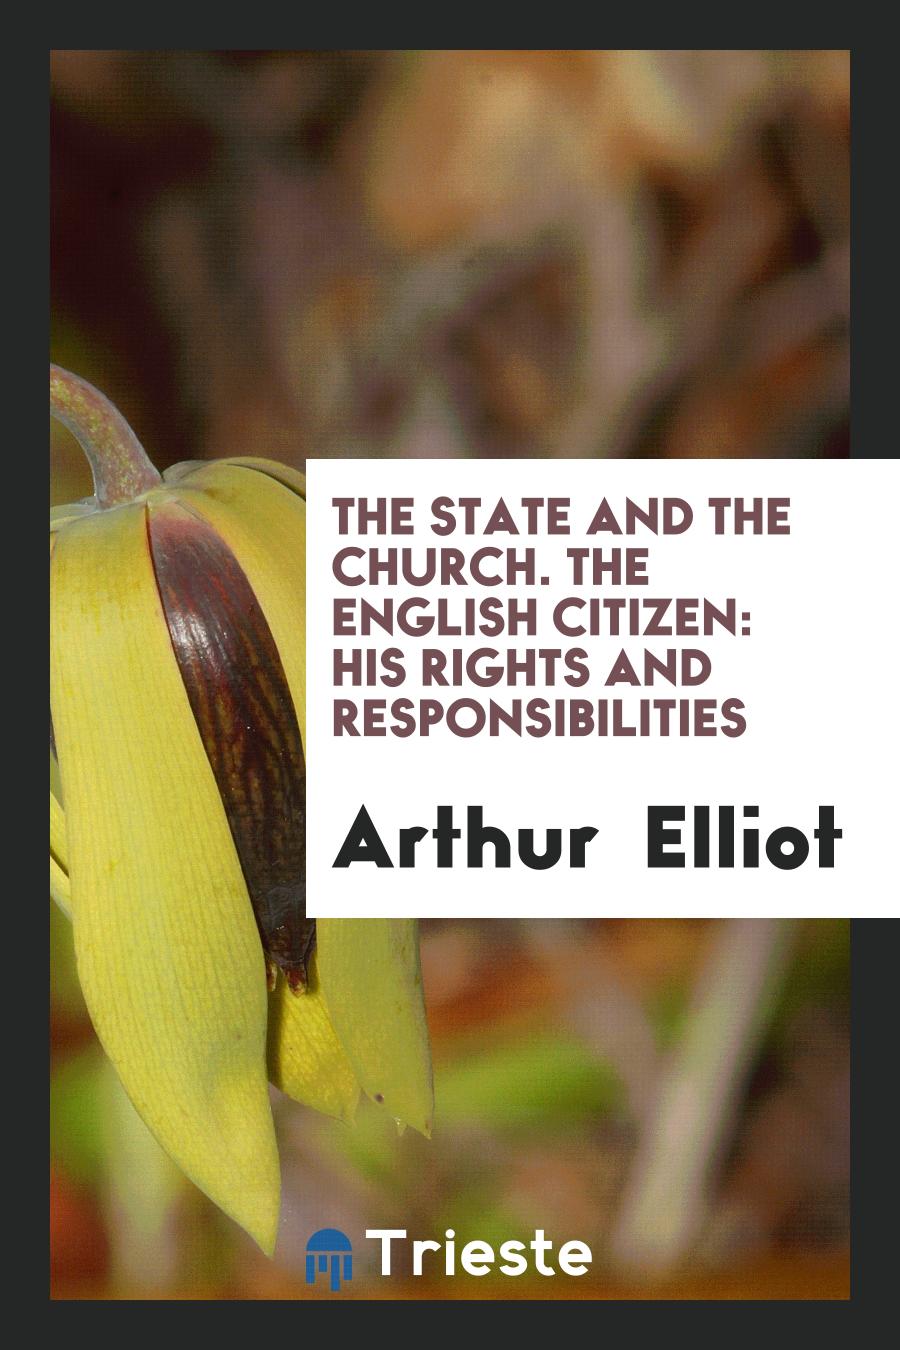 The State and the Church. The English Citizen: His Rights and Responsibilities